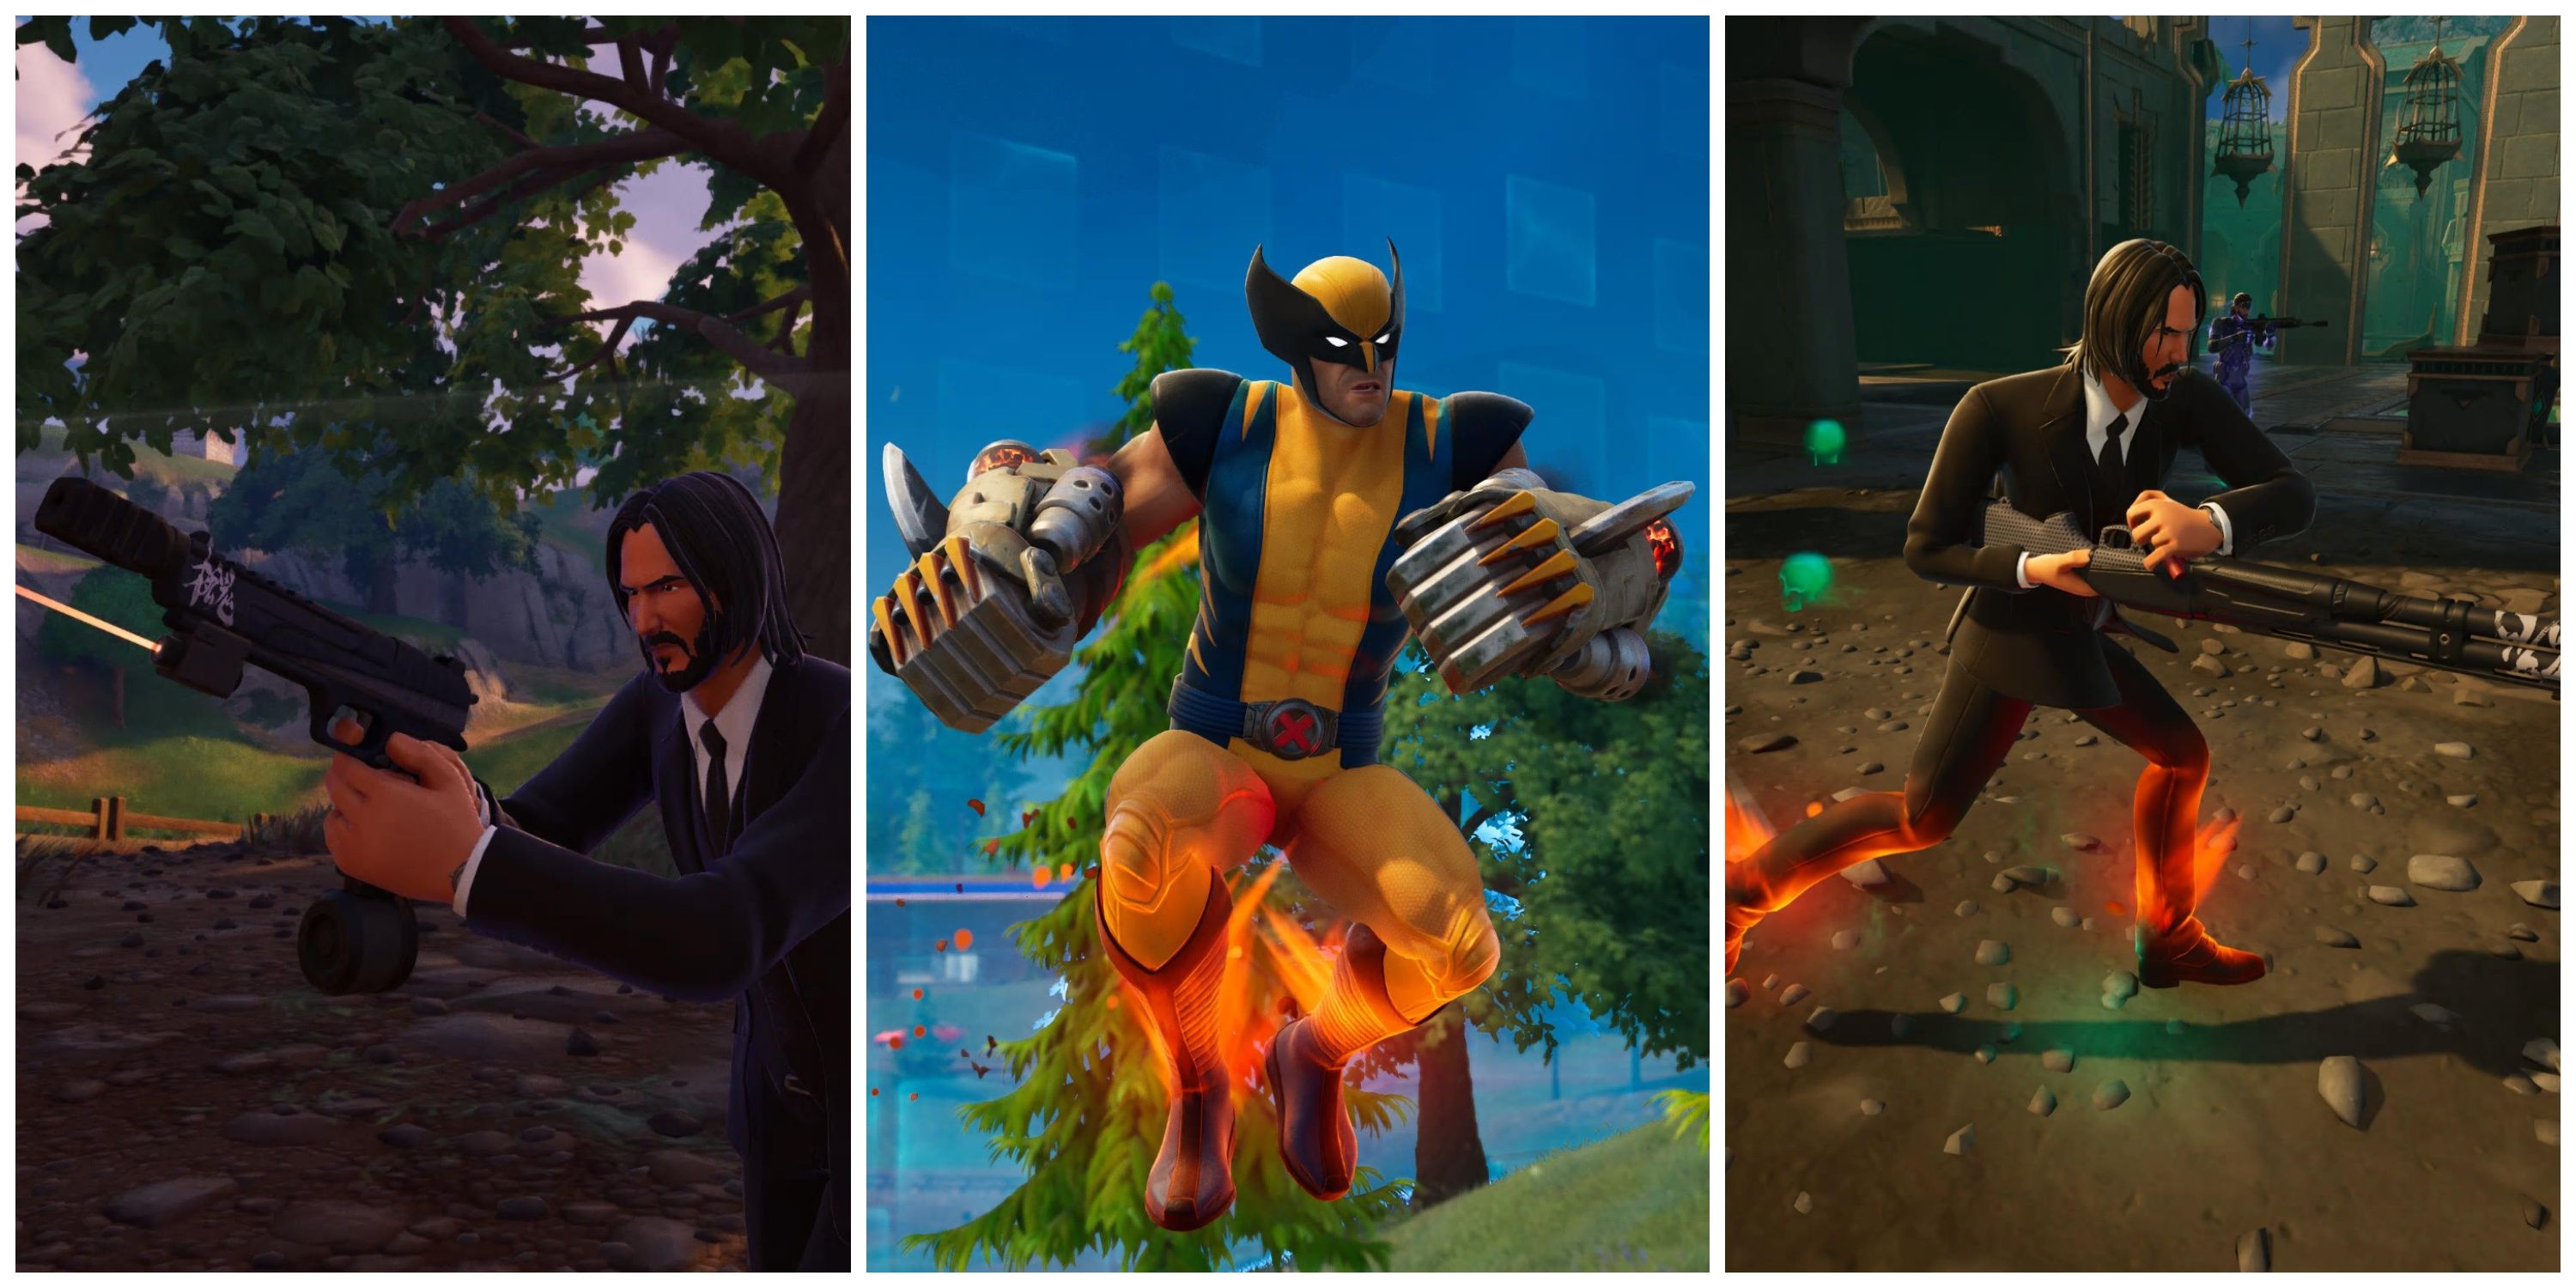 john wick and wolverine with weapons in fortnite